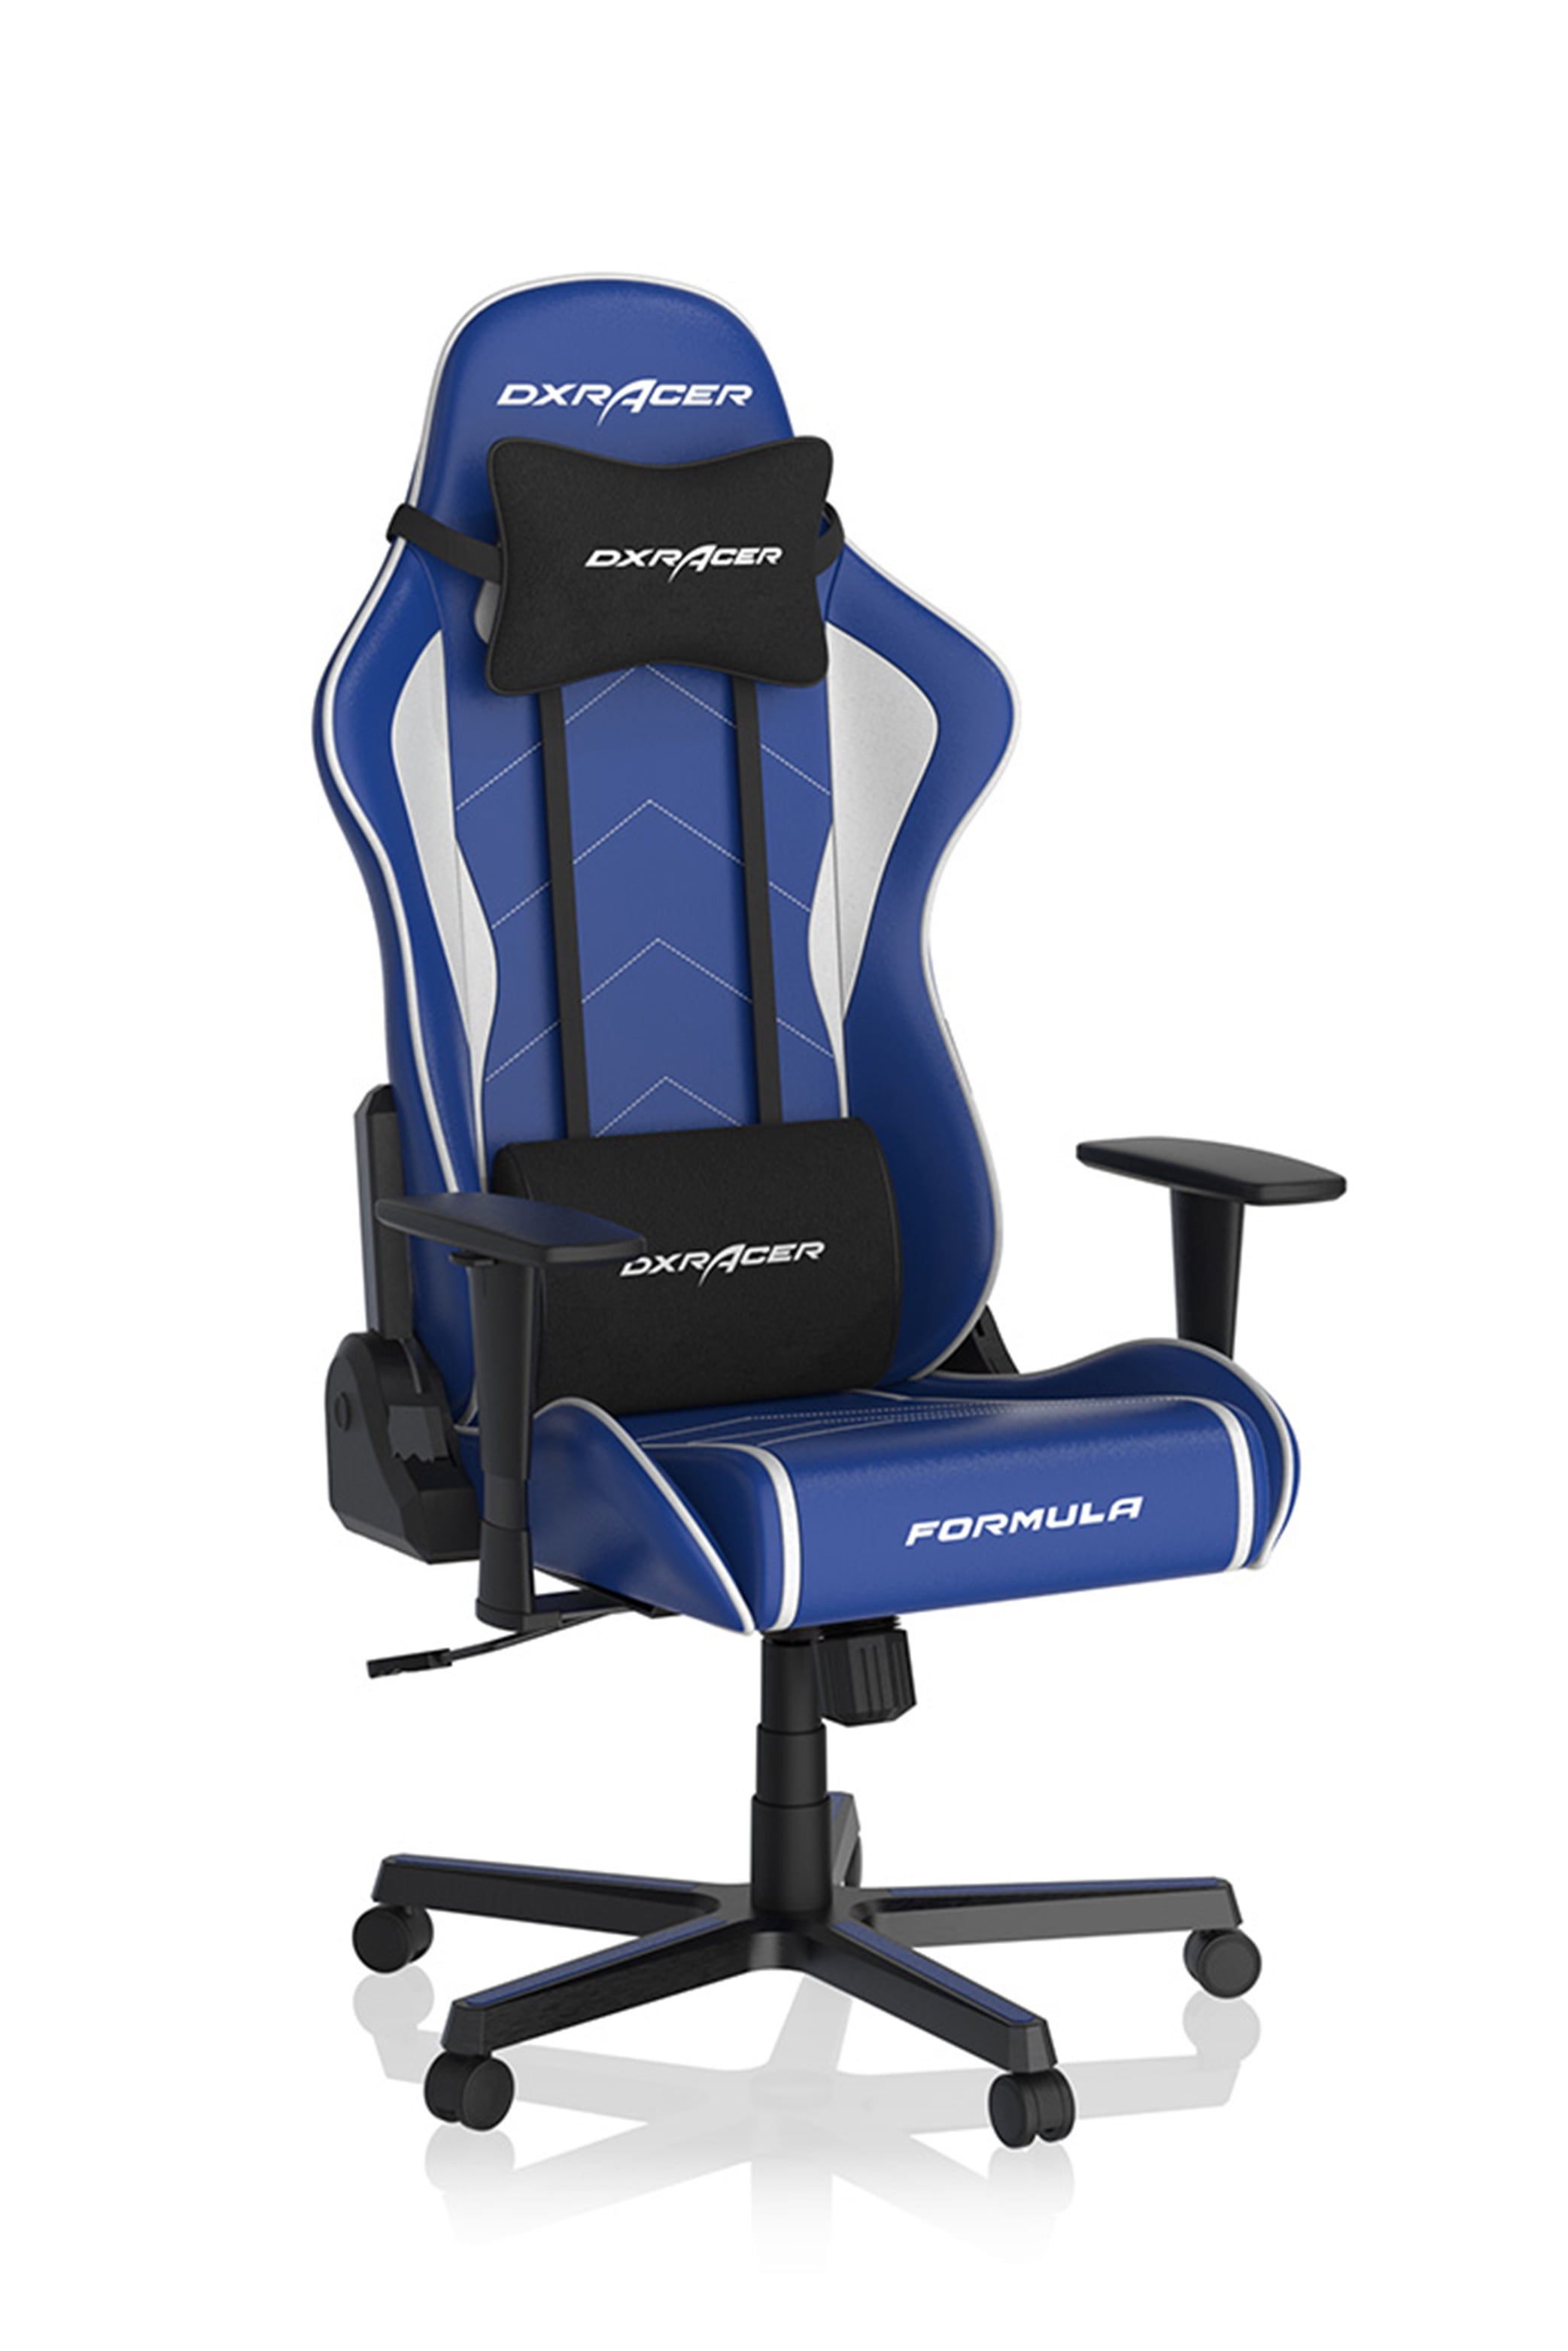 DXRacer Gaming Chair PC to FR08- and Formula Chair up 200 Office Indigo lb, White Leather, PU Series